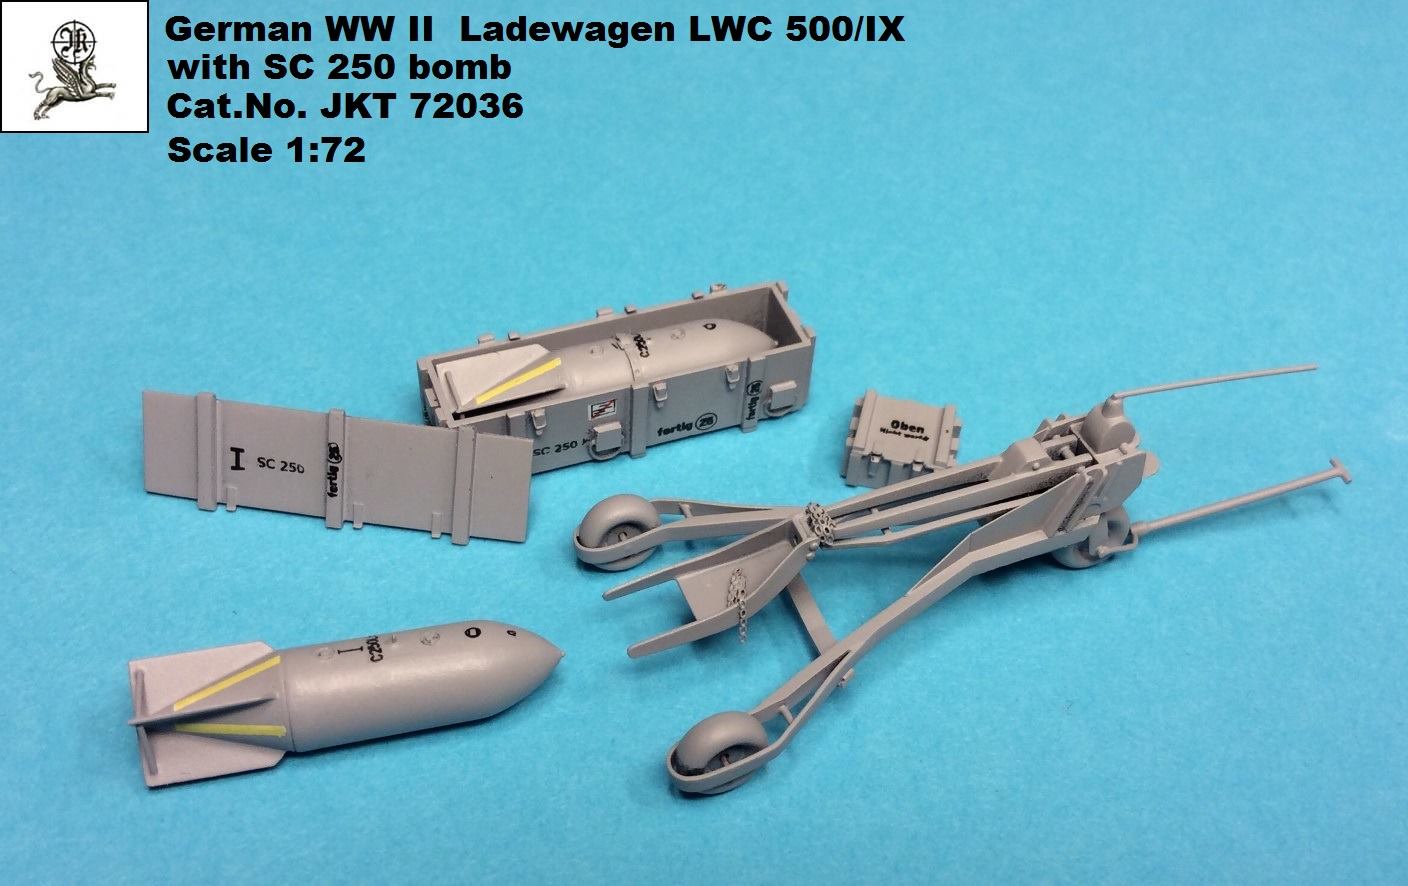 Luftwaffe Ladewagen LWC500/IX with SC 250 bombs - Click Image to Close